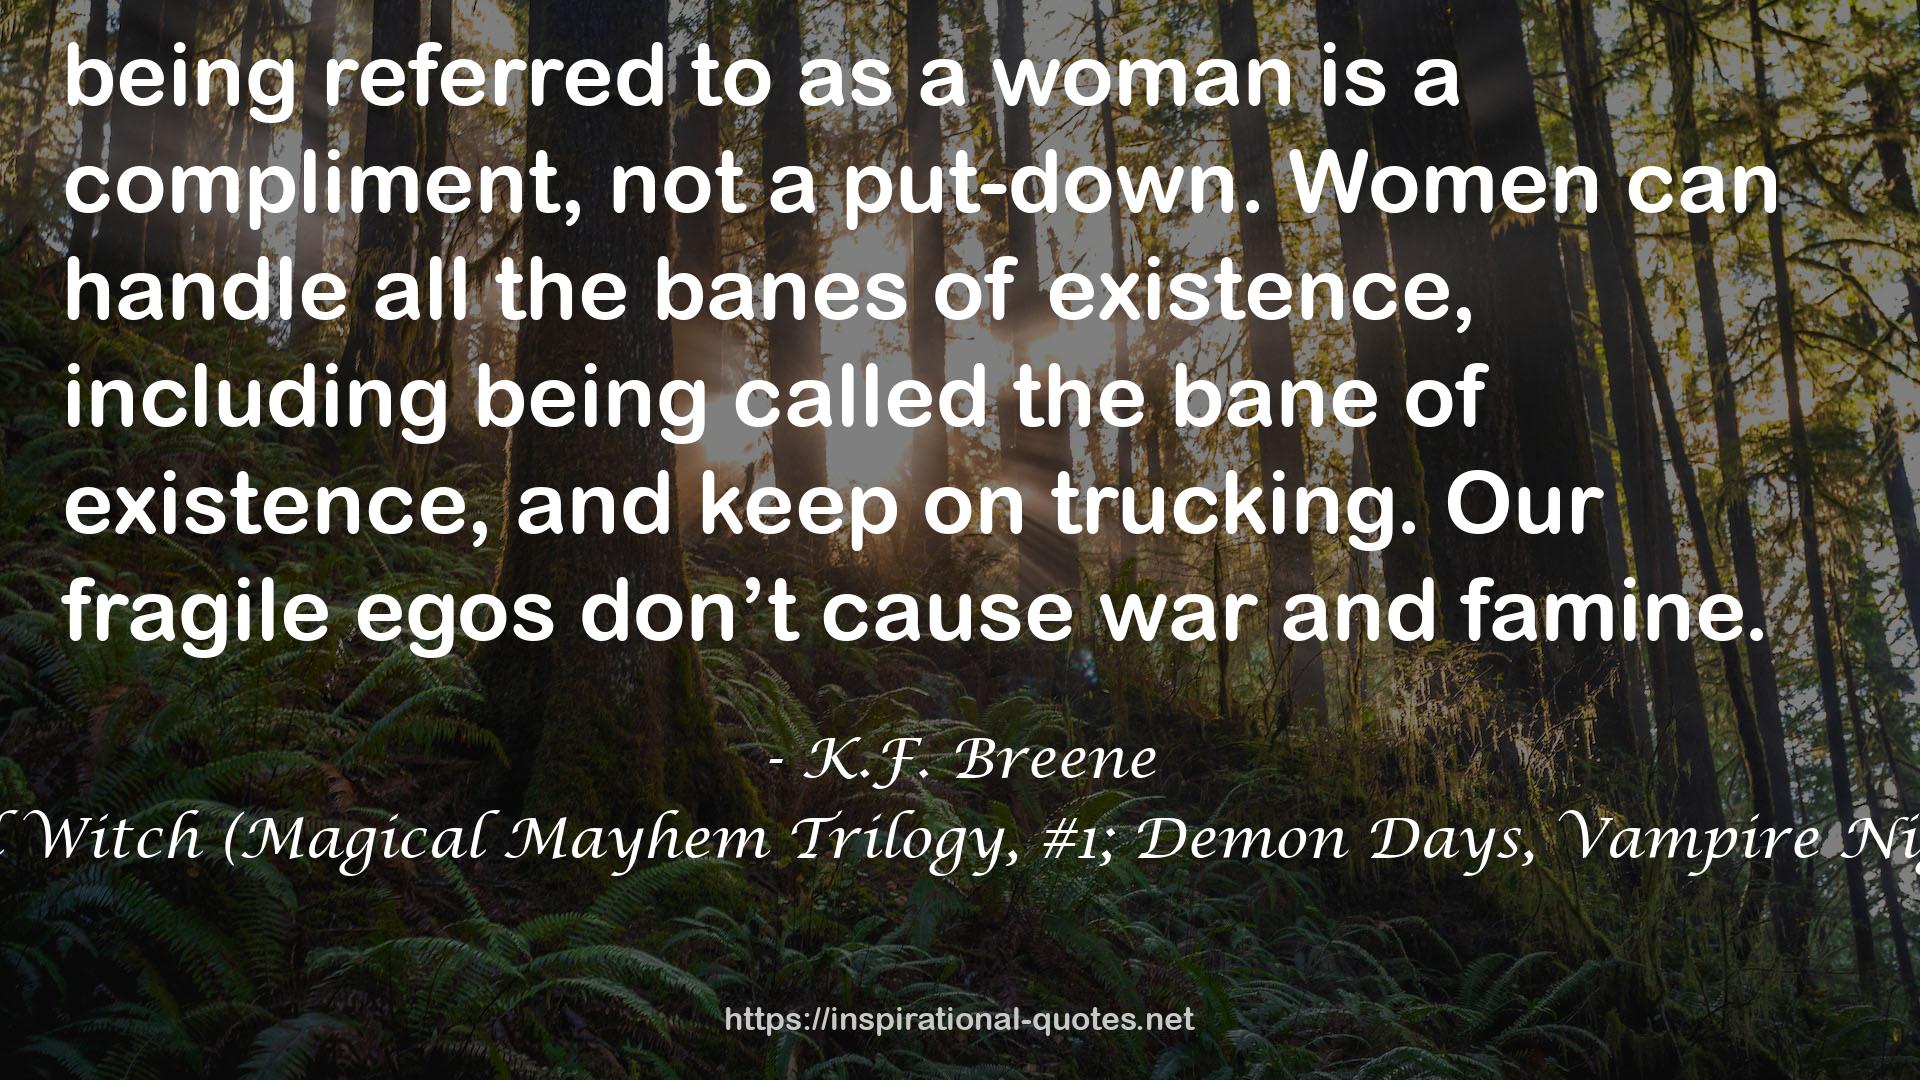 Natural Witch (Magical Mayhem Trilogy, #1; Demon Days, Vampire Nights, #4) QUOTES